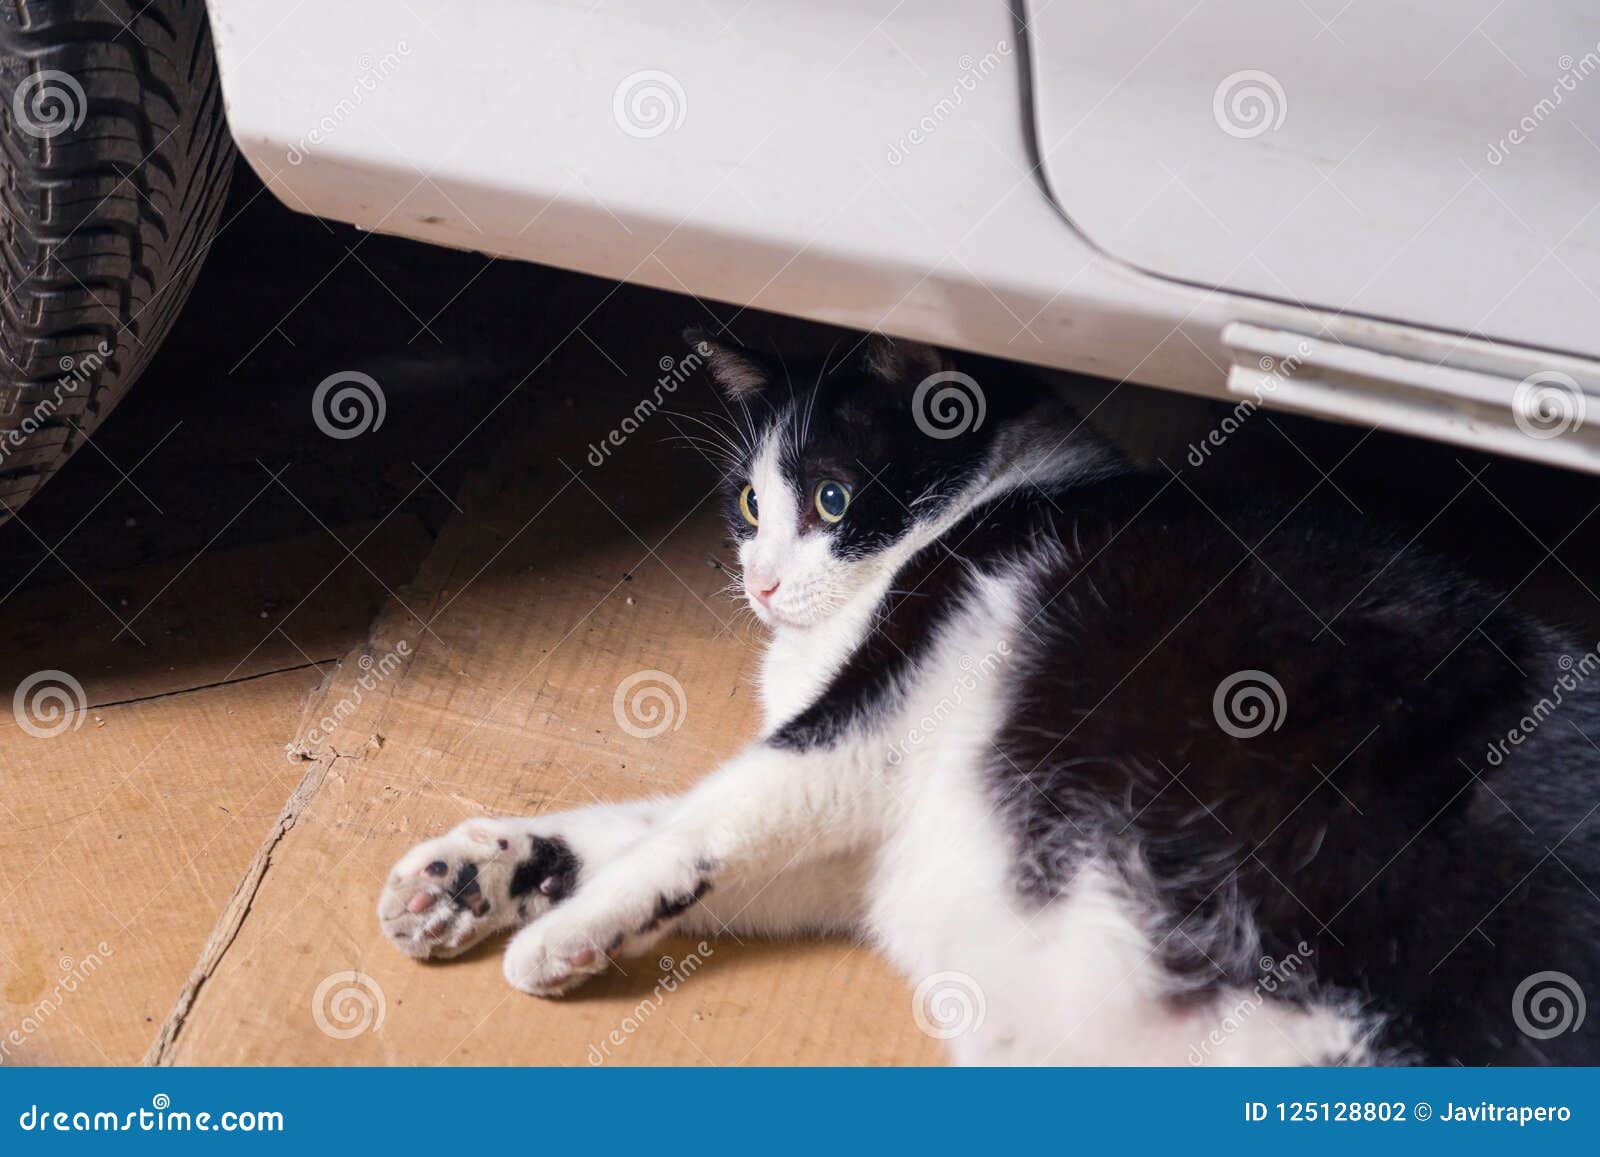 resting cat, lying on cardboards behind a car, surprised.